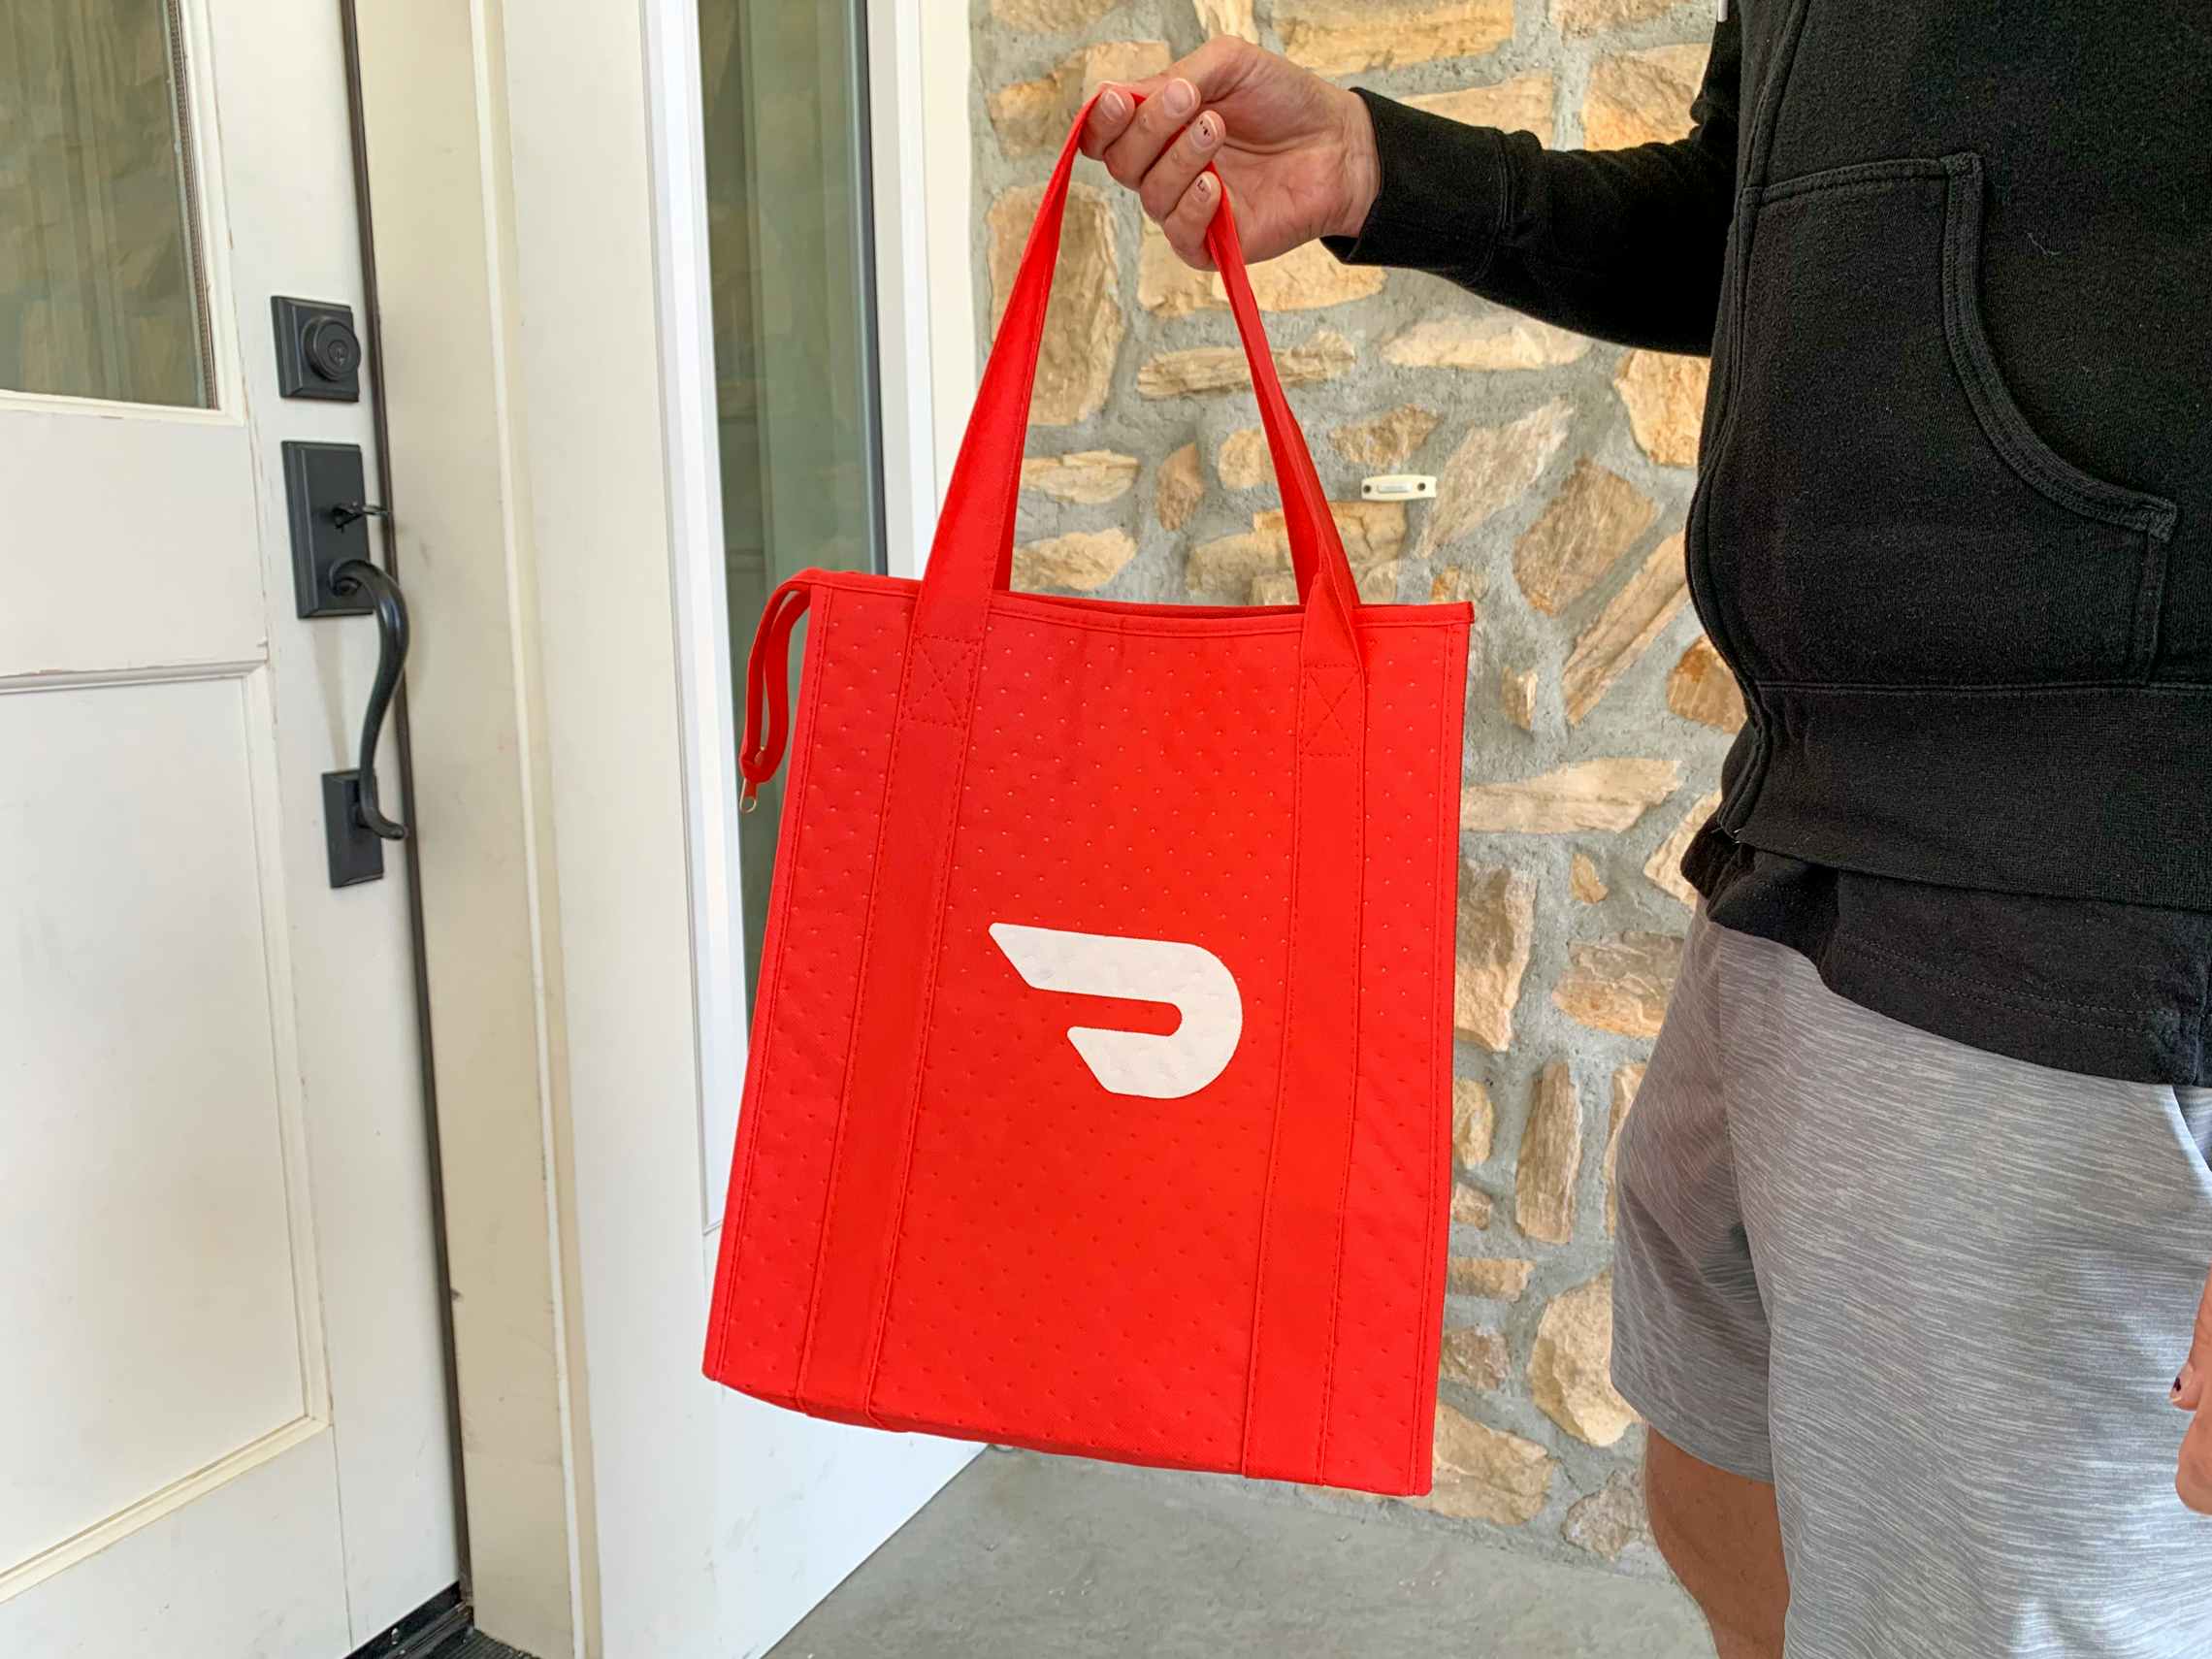 A person holding up a Doordash delivery bag outside of a front door.